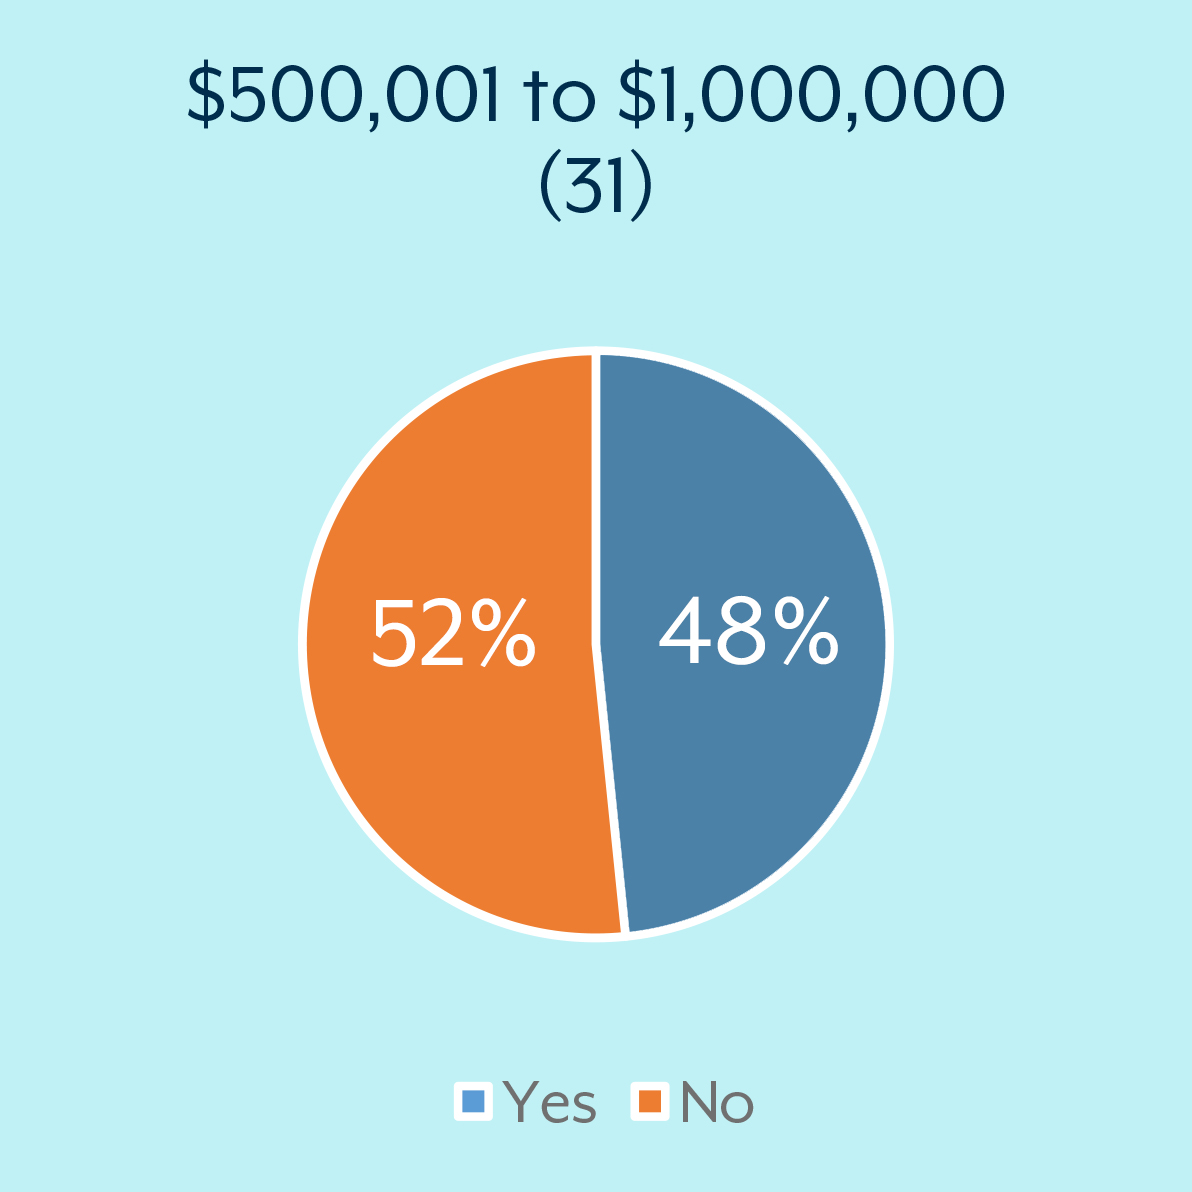 $500,000 to $1 million: Yes = 48% No 52%